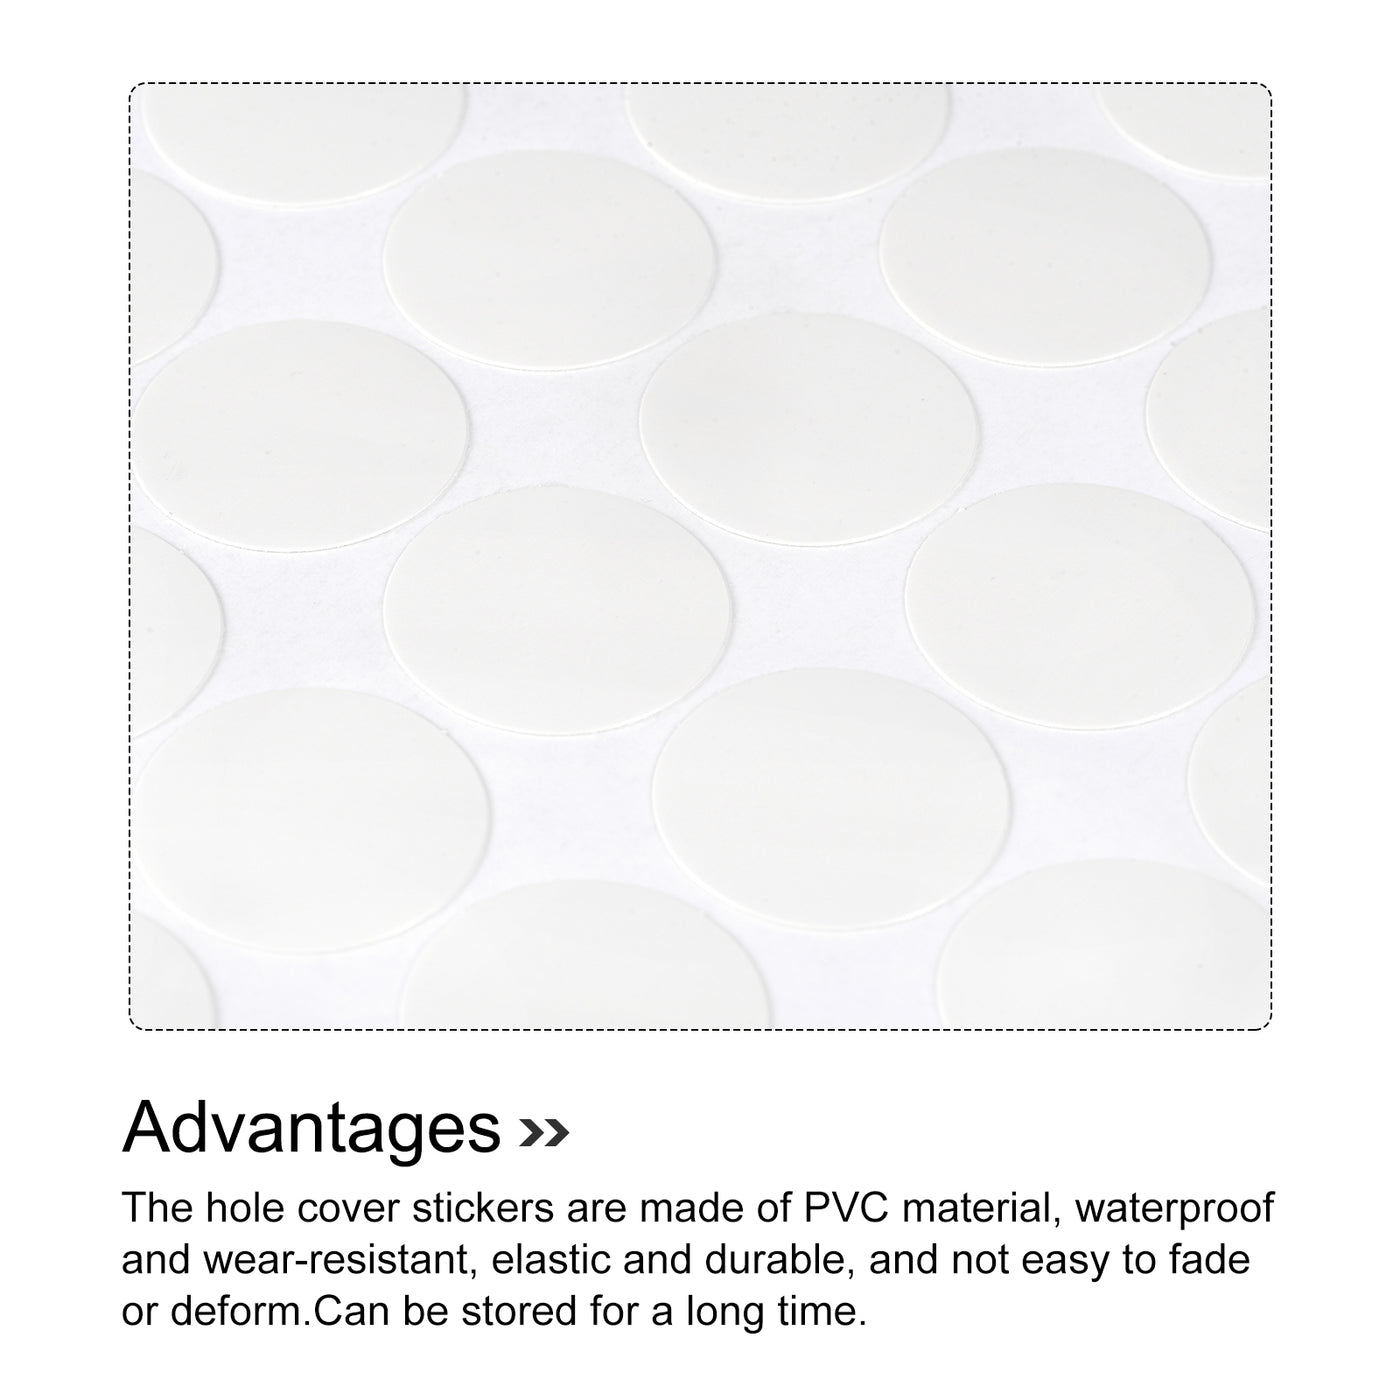 uxcell Uxcell Screw Hole Cover Stickers, 15mm Dia PVC Self Adhesive Covers Caps for Wood Furniture Cabinet Shelf Wardrobe, White 4 Sheet/384pcs